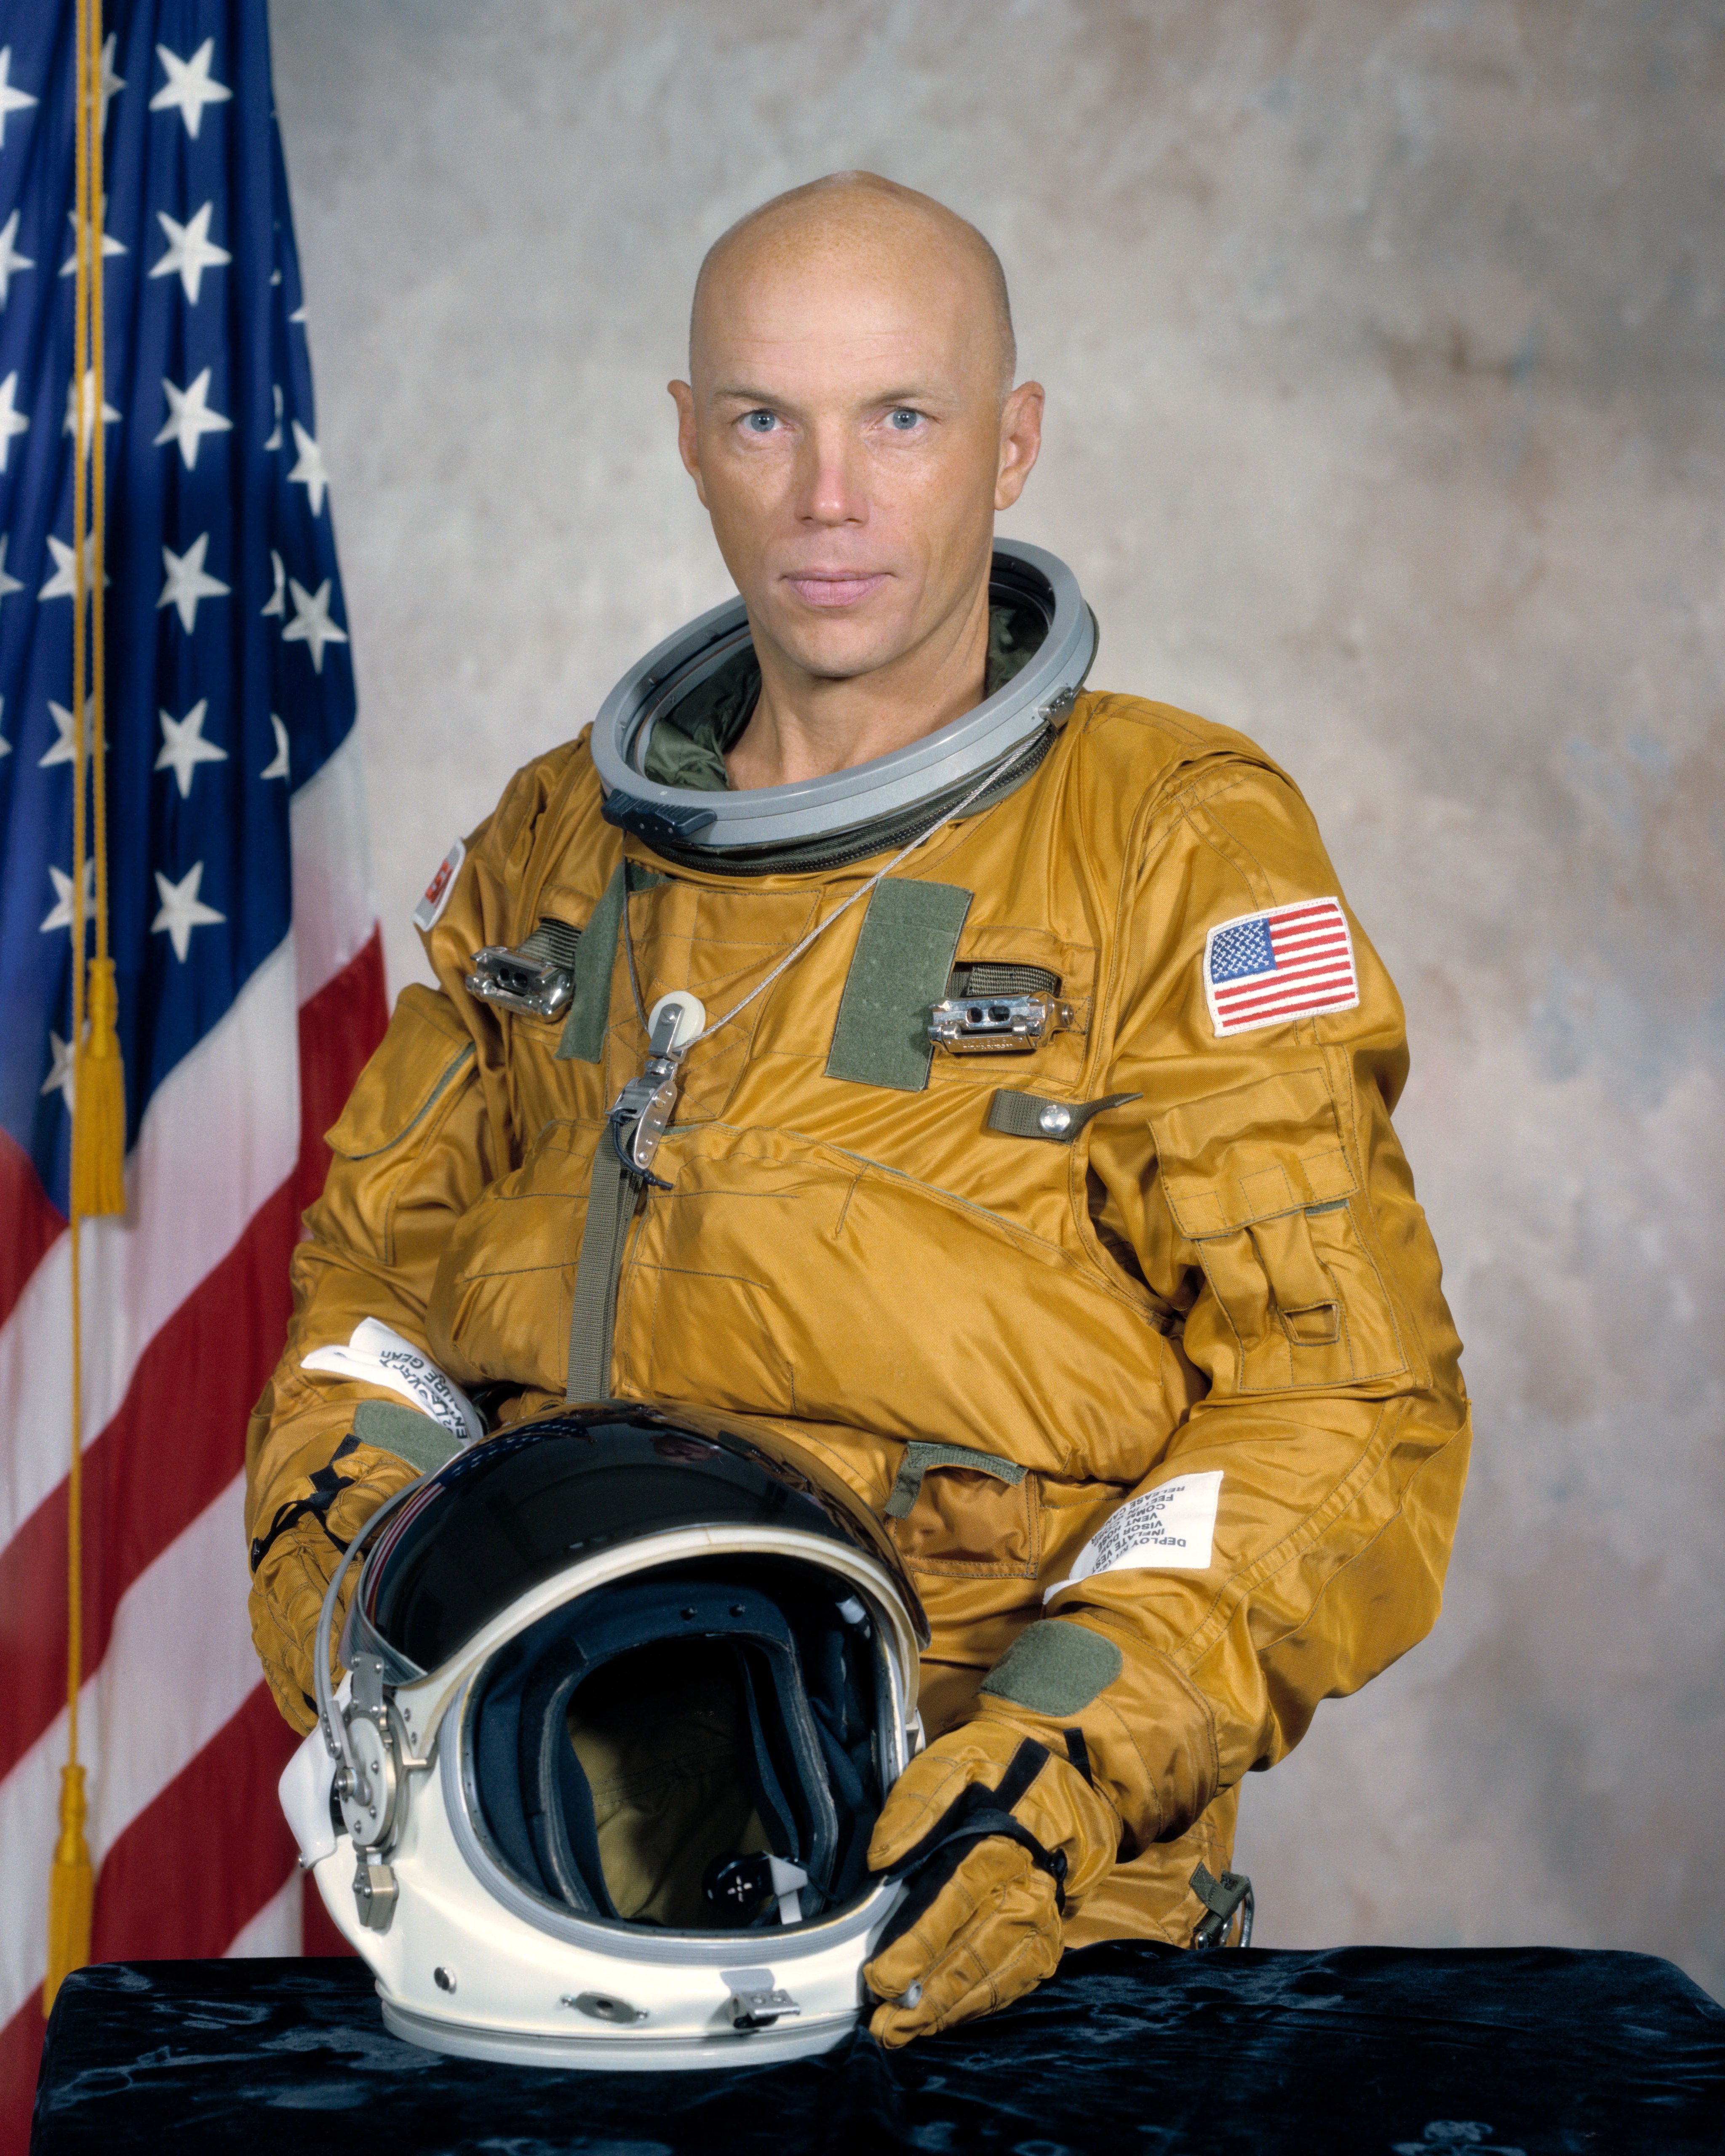 Official astronaut portrait of F Story Musgrave.